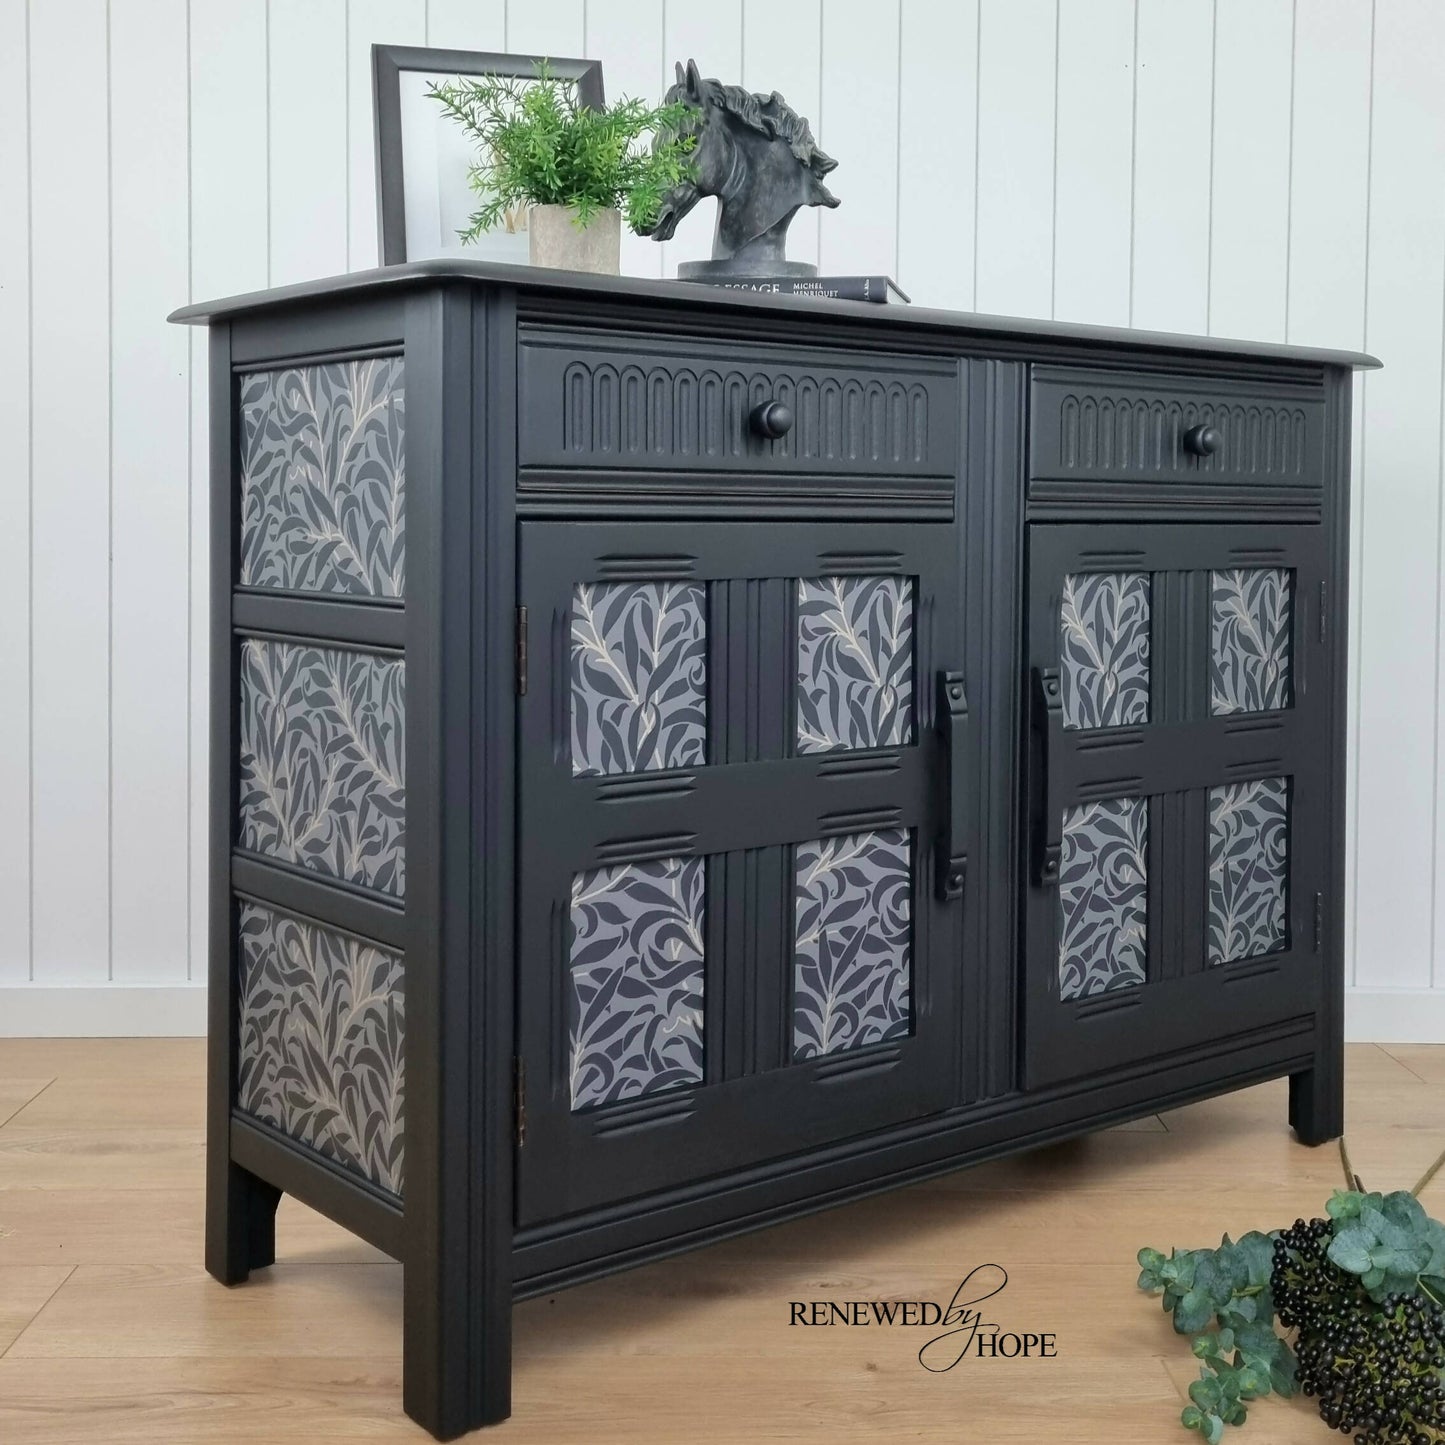 SOLD - Black Vintage Priory Sideboard / Cupboard / Storage with William Morris Willow Bough detail, Hallway, Dining Room, Upcycled